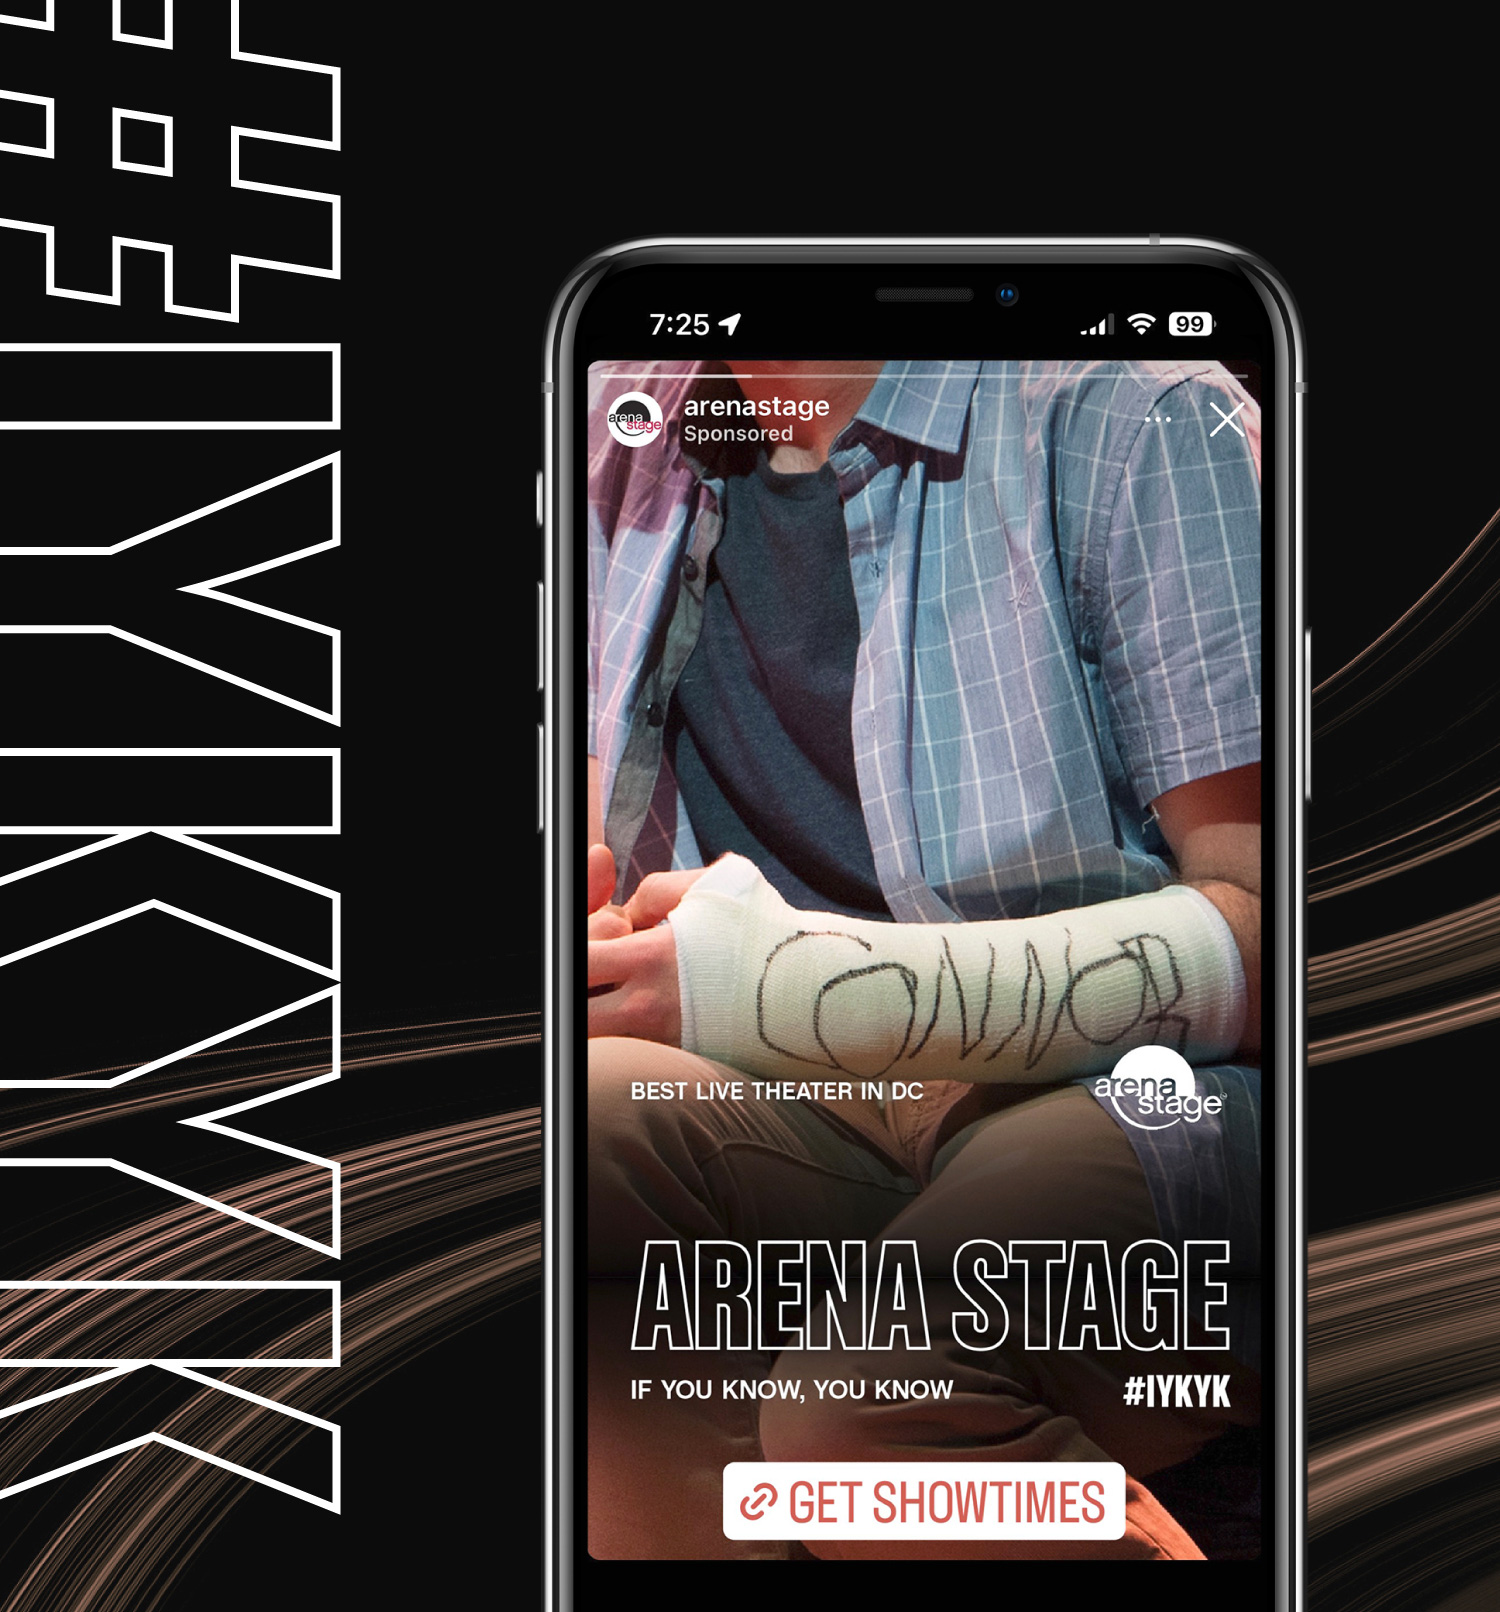 photo of cell phone displaying one of the Arena Stage ads. Vertical text on the left side reads #IYKYK.